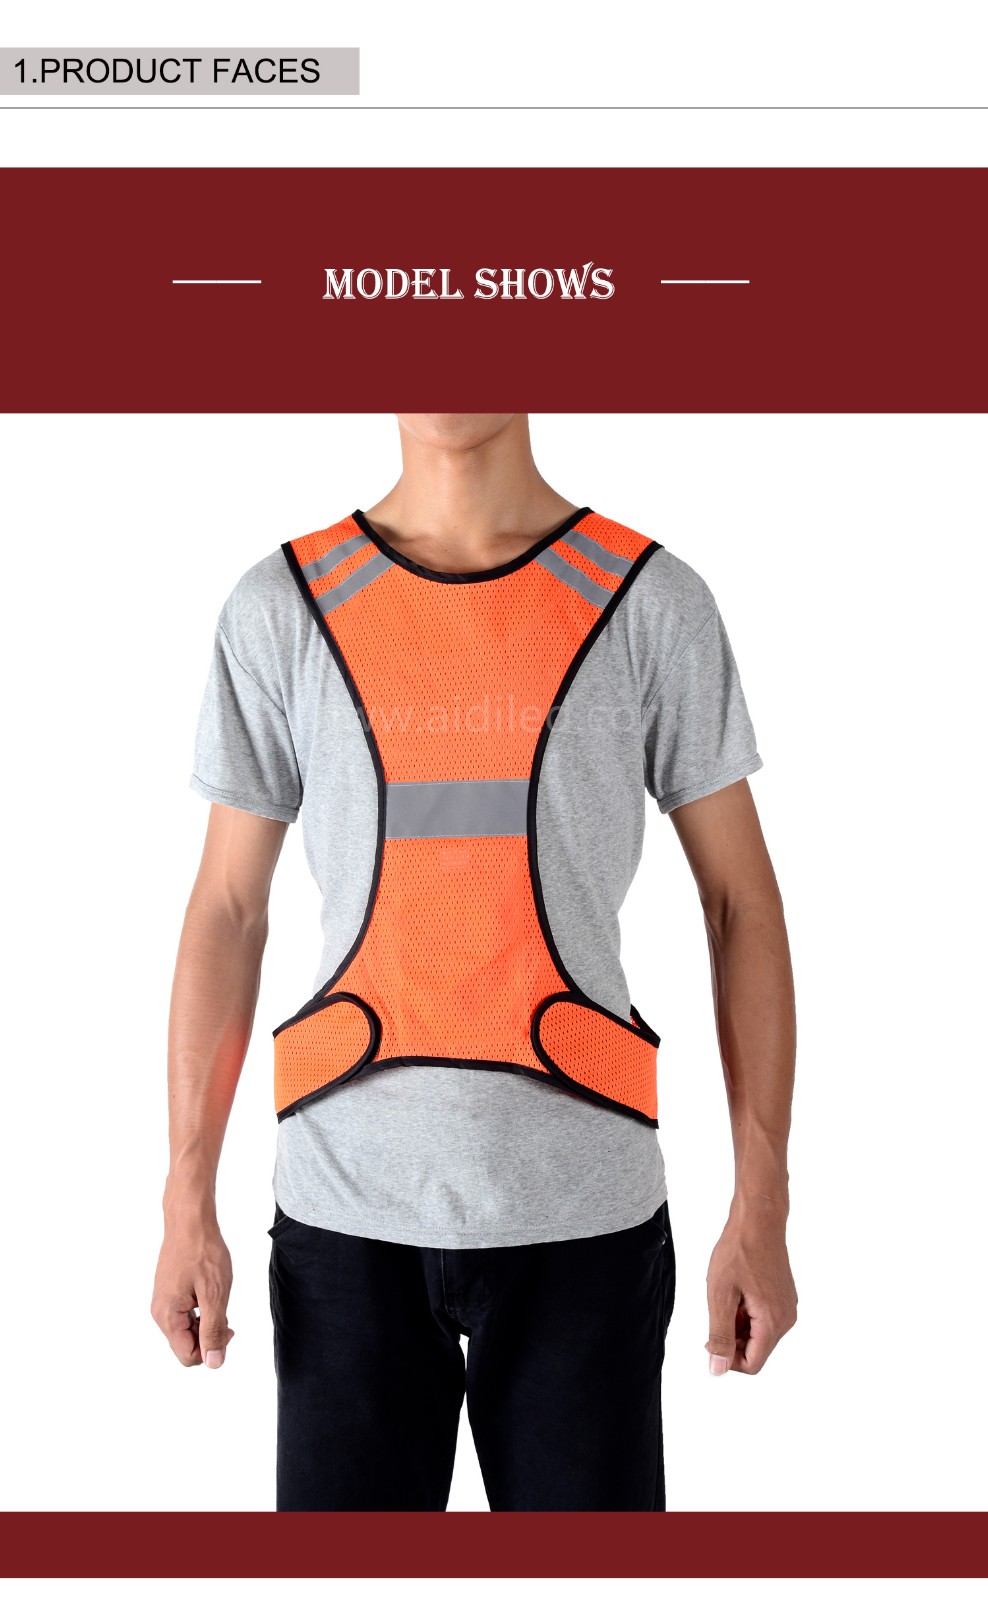 -| Led Outdoor Sports Safety Vest Aidi-s11 - Shenghong-2